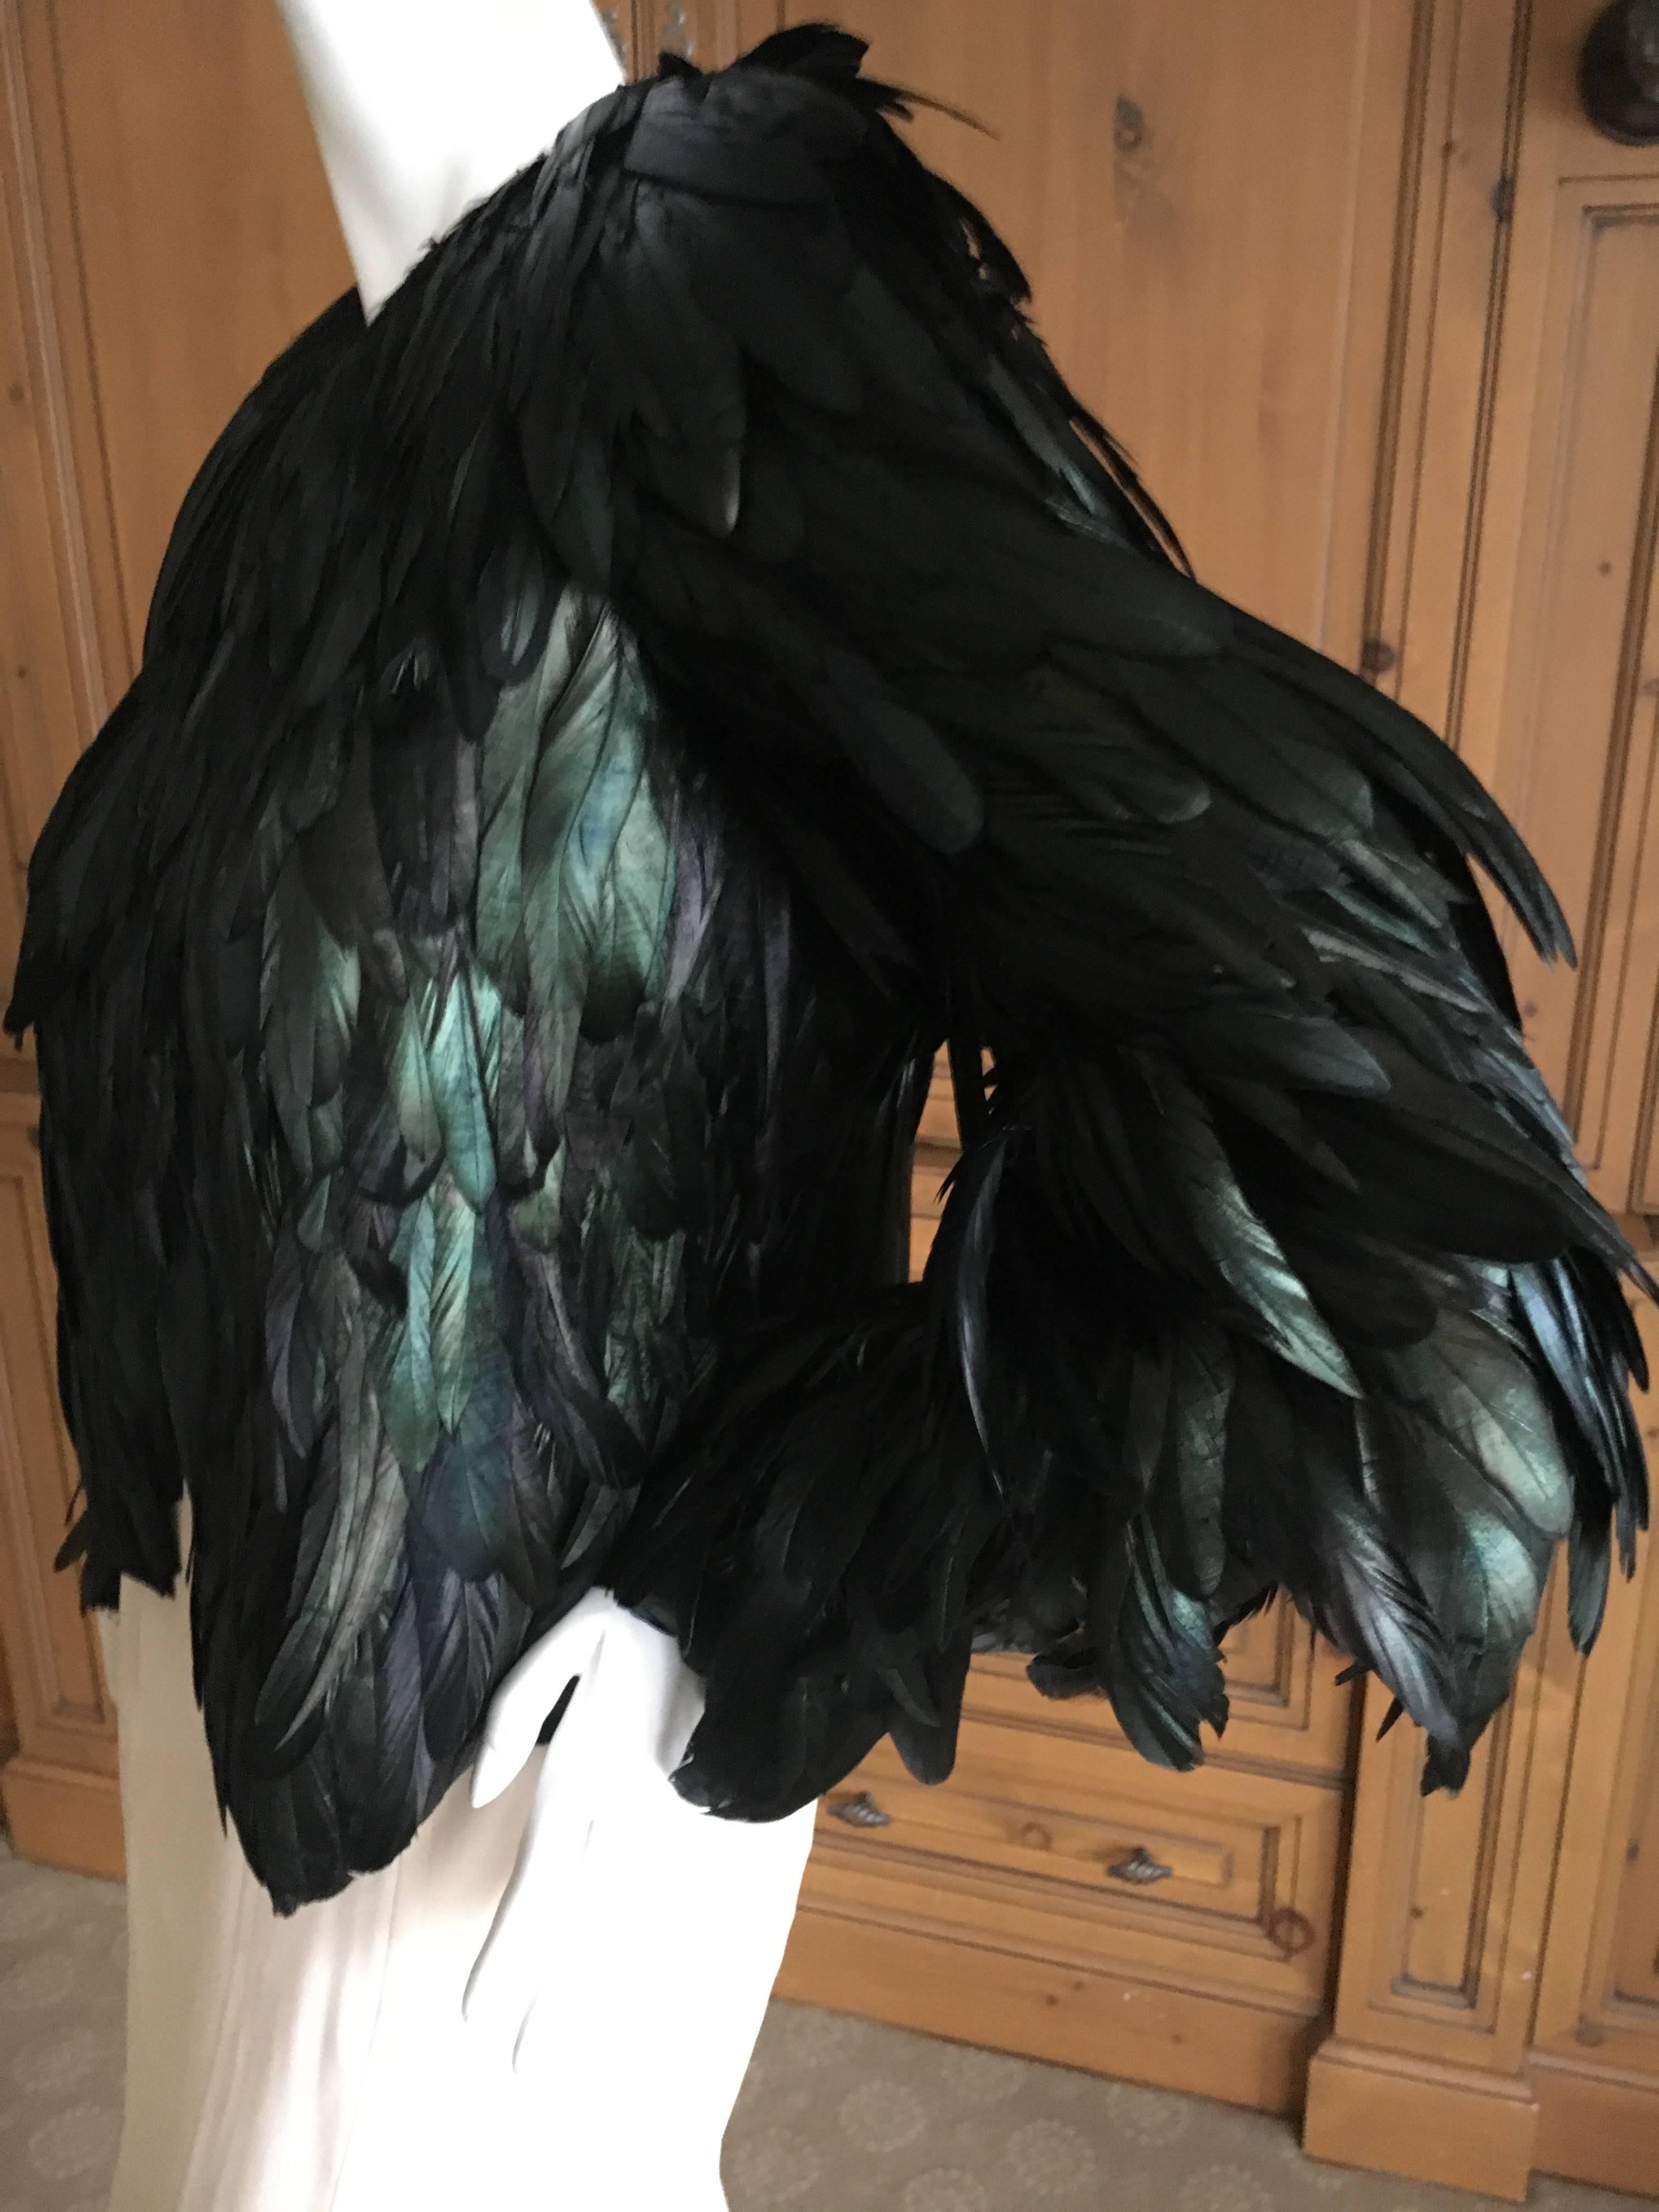 Amazing Coq feather jacket from Gucci
Fall 2012
Size 42, 
Seems to run small, especially the cuff of the sleeves, which are very tiny.
It has very long sleeves with small cuff openings.

 Bust 40